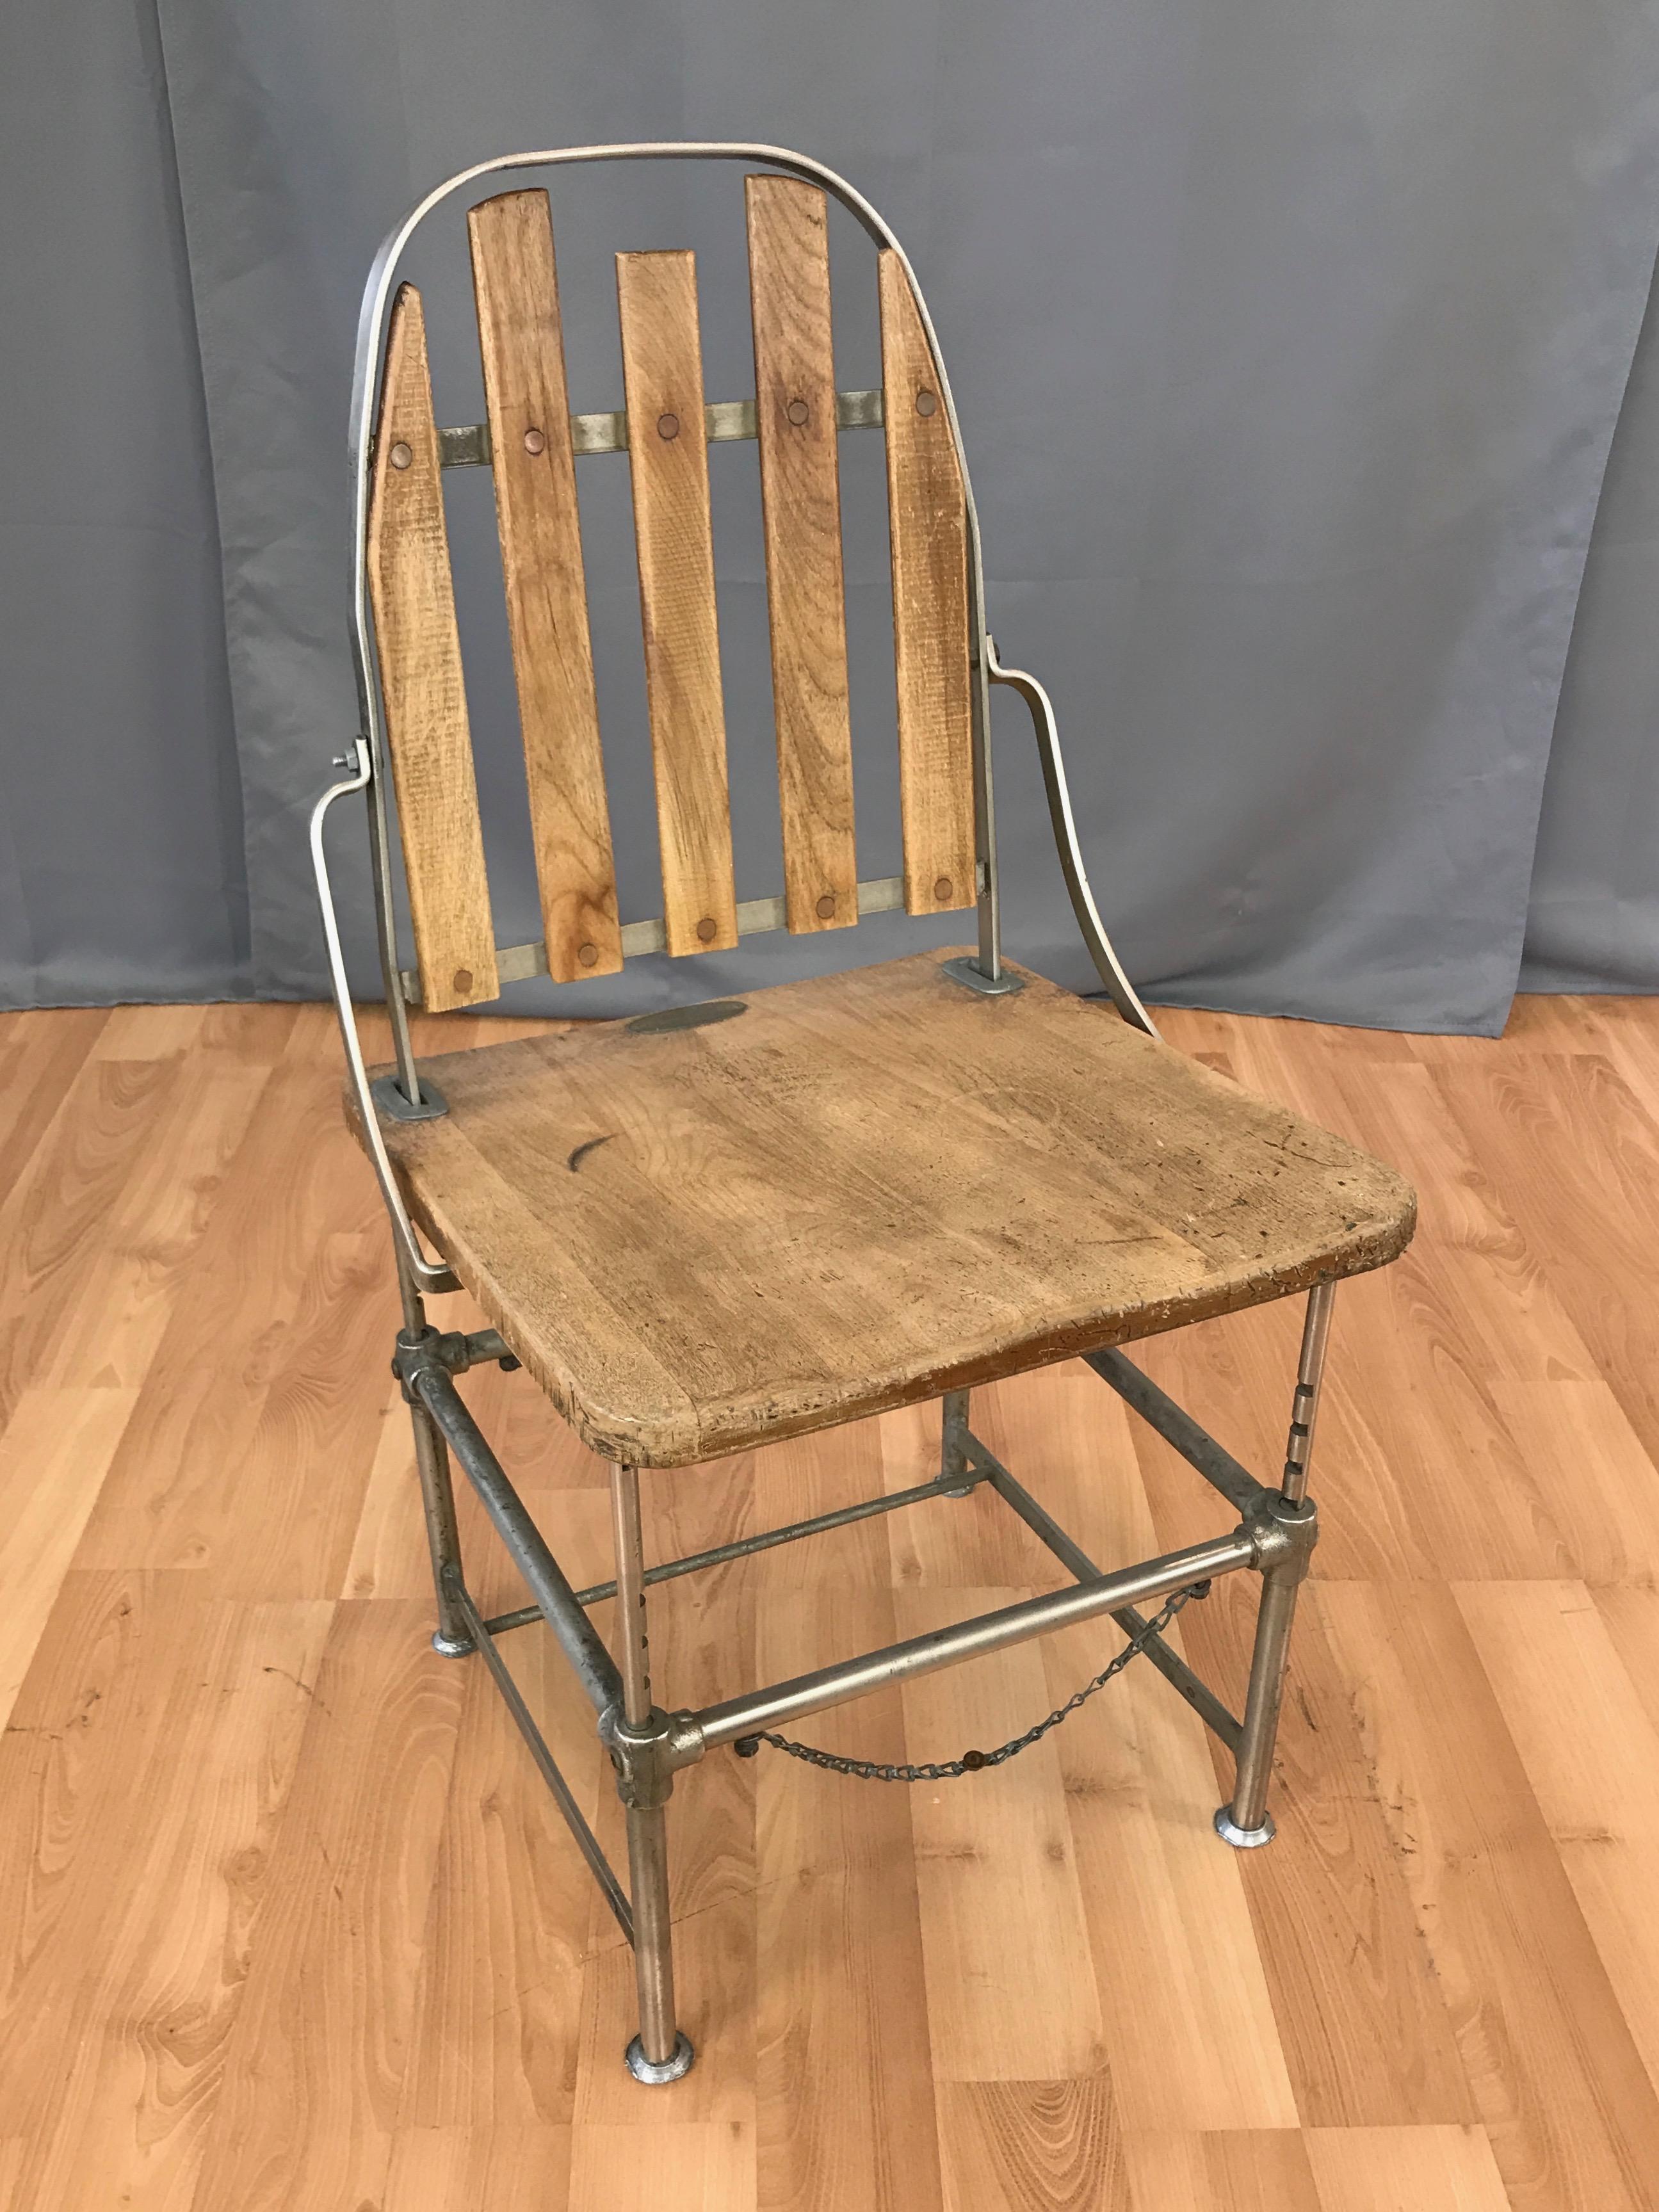 Early 20th Century Brizard & Young “Adjustable Industrial Chair”, circa 1900